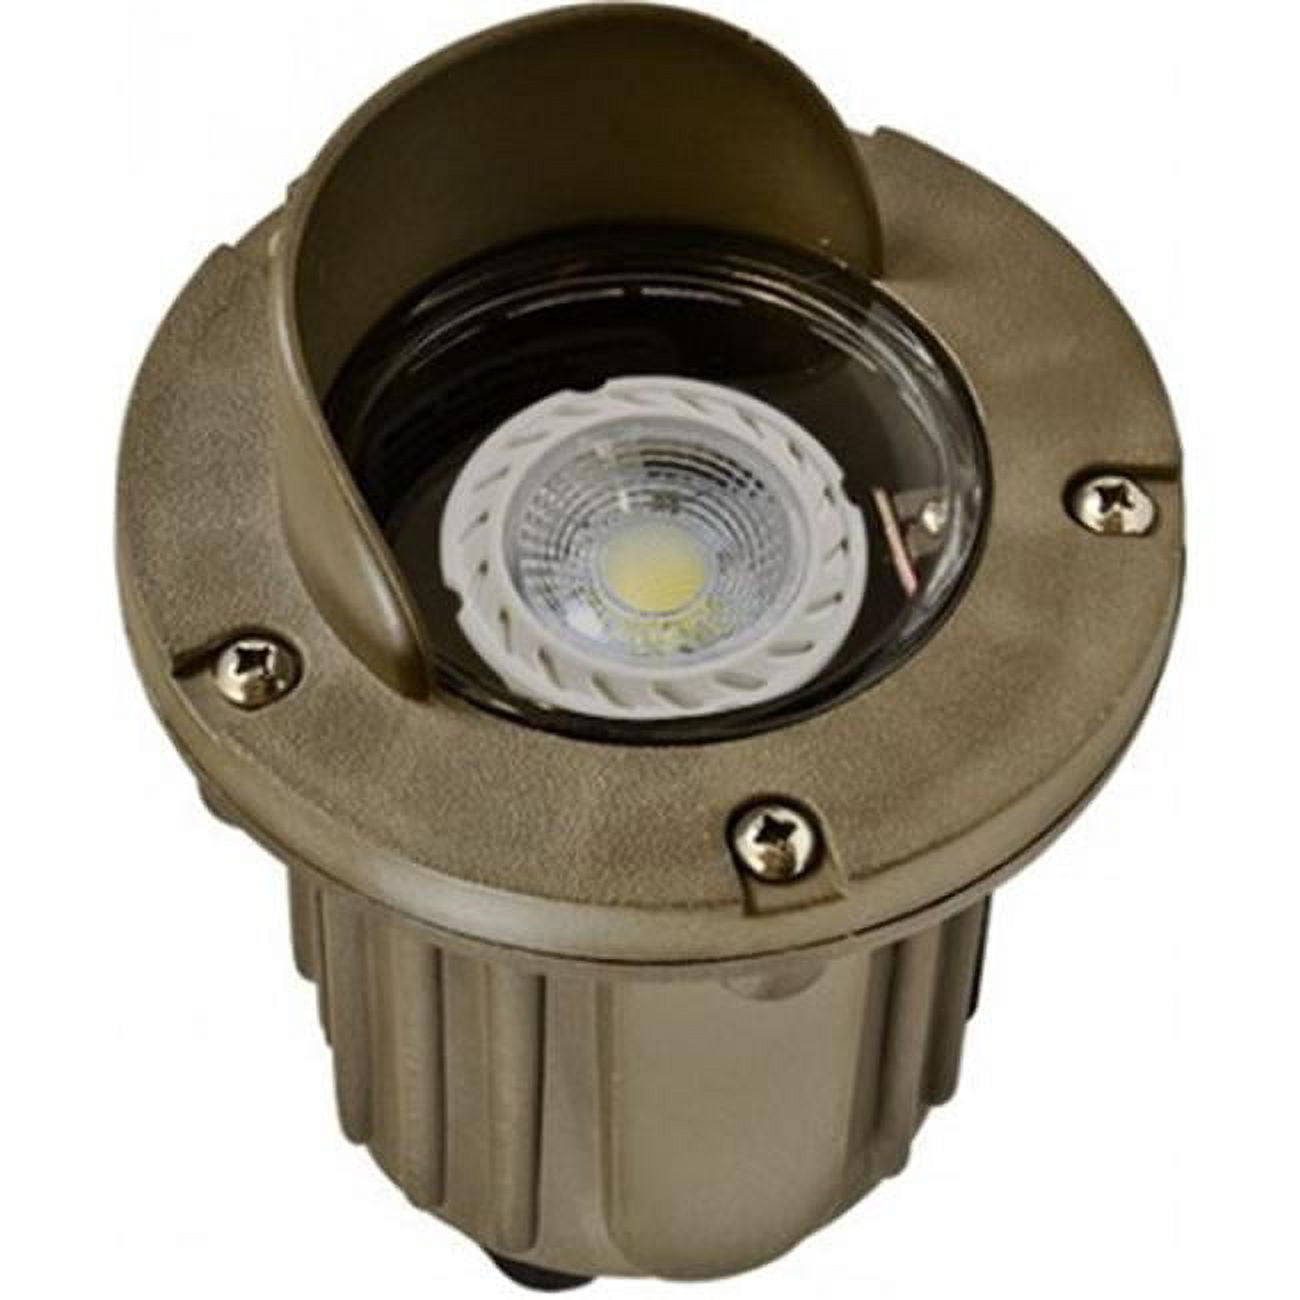 Picture of Dabmar Lighting LV347-BZ Polybutylene Terephthalate Adjustable In-Ground Well Light with Hood, Bronze - 5.88 x 4.88 x 5 in.